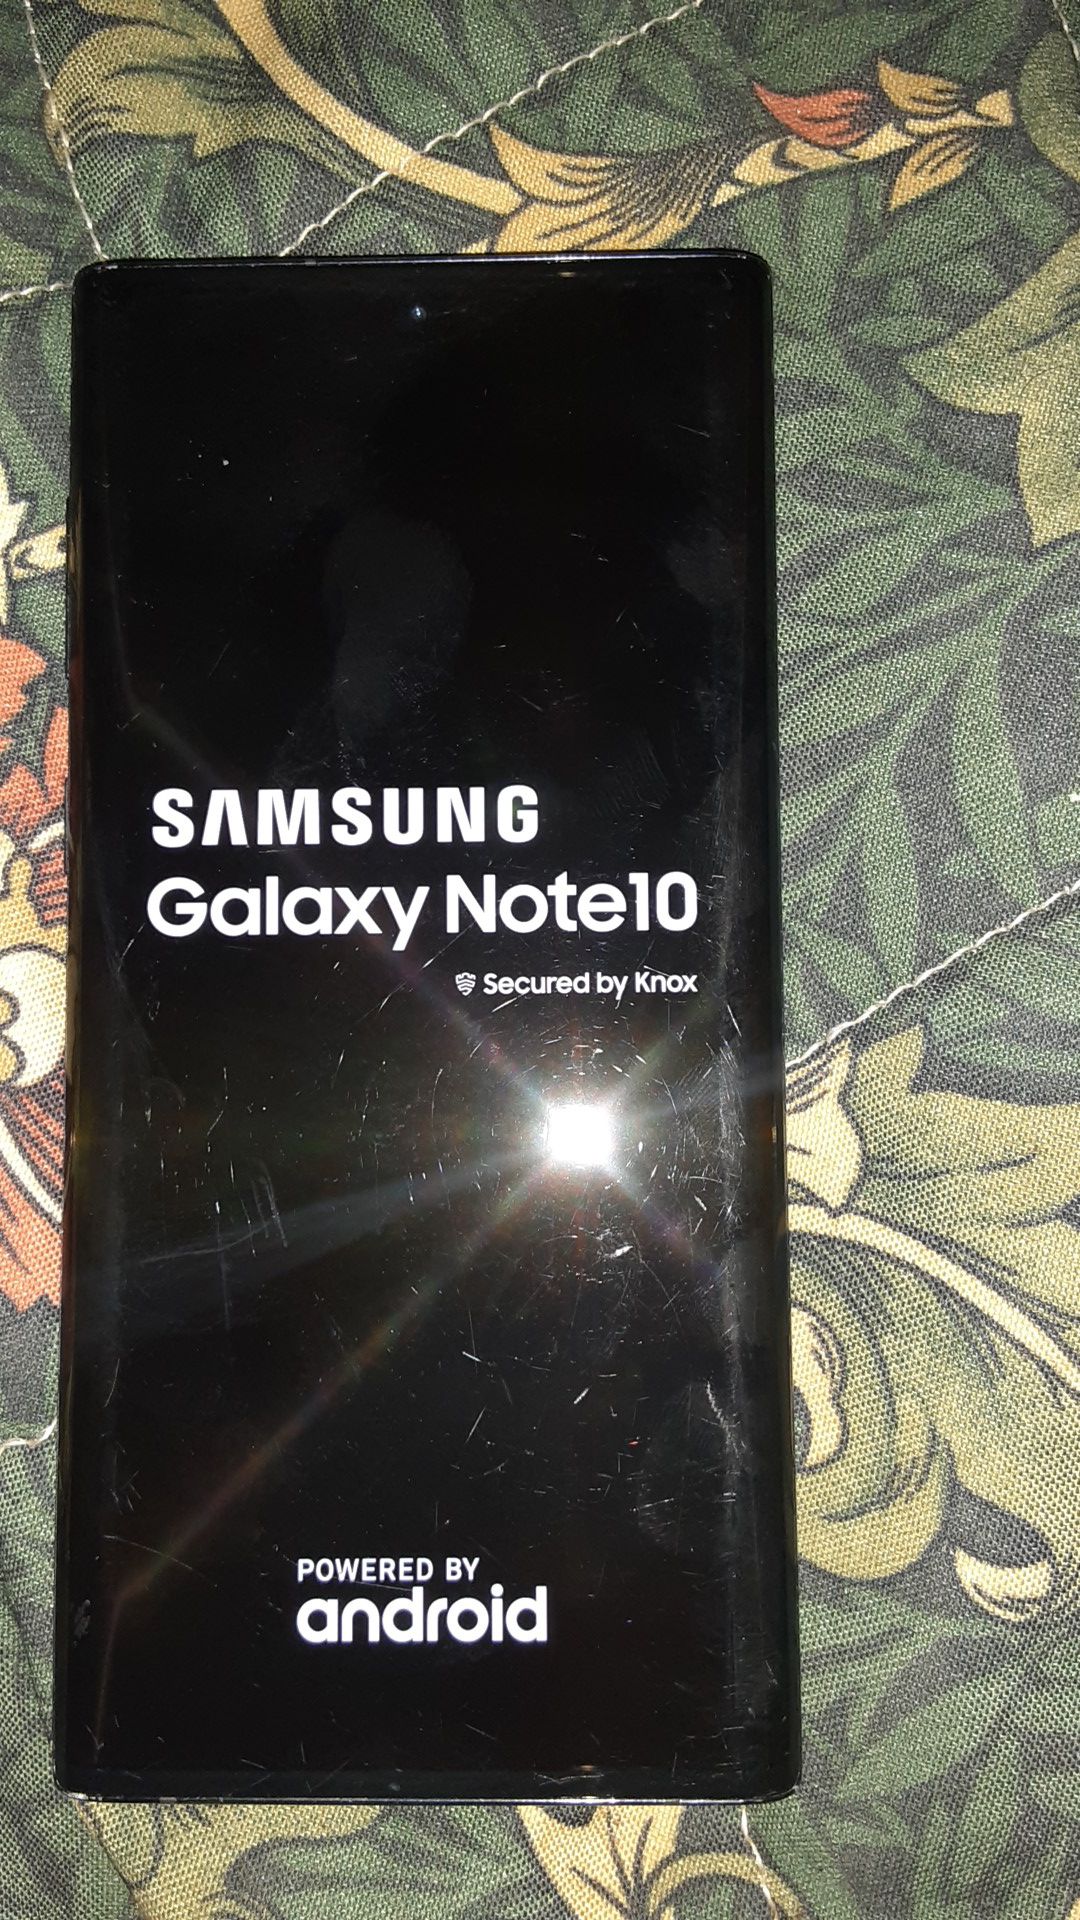 Samsung galaxy note 10 256gig brand new and unlocked in perfect condition